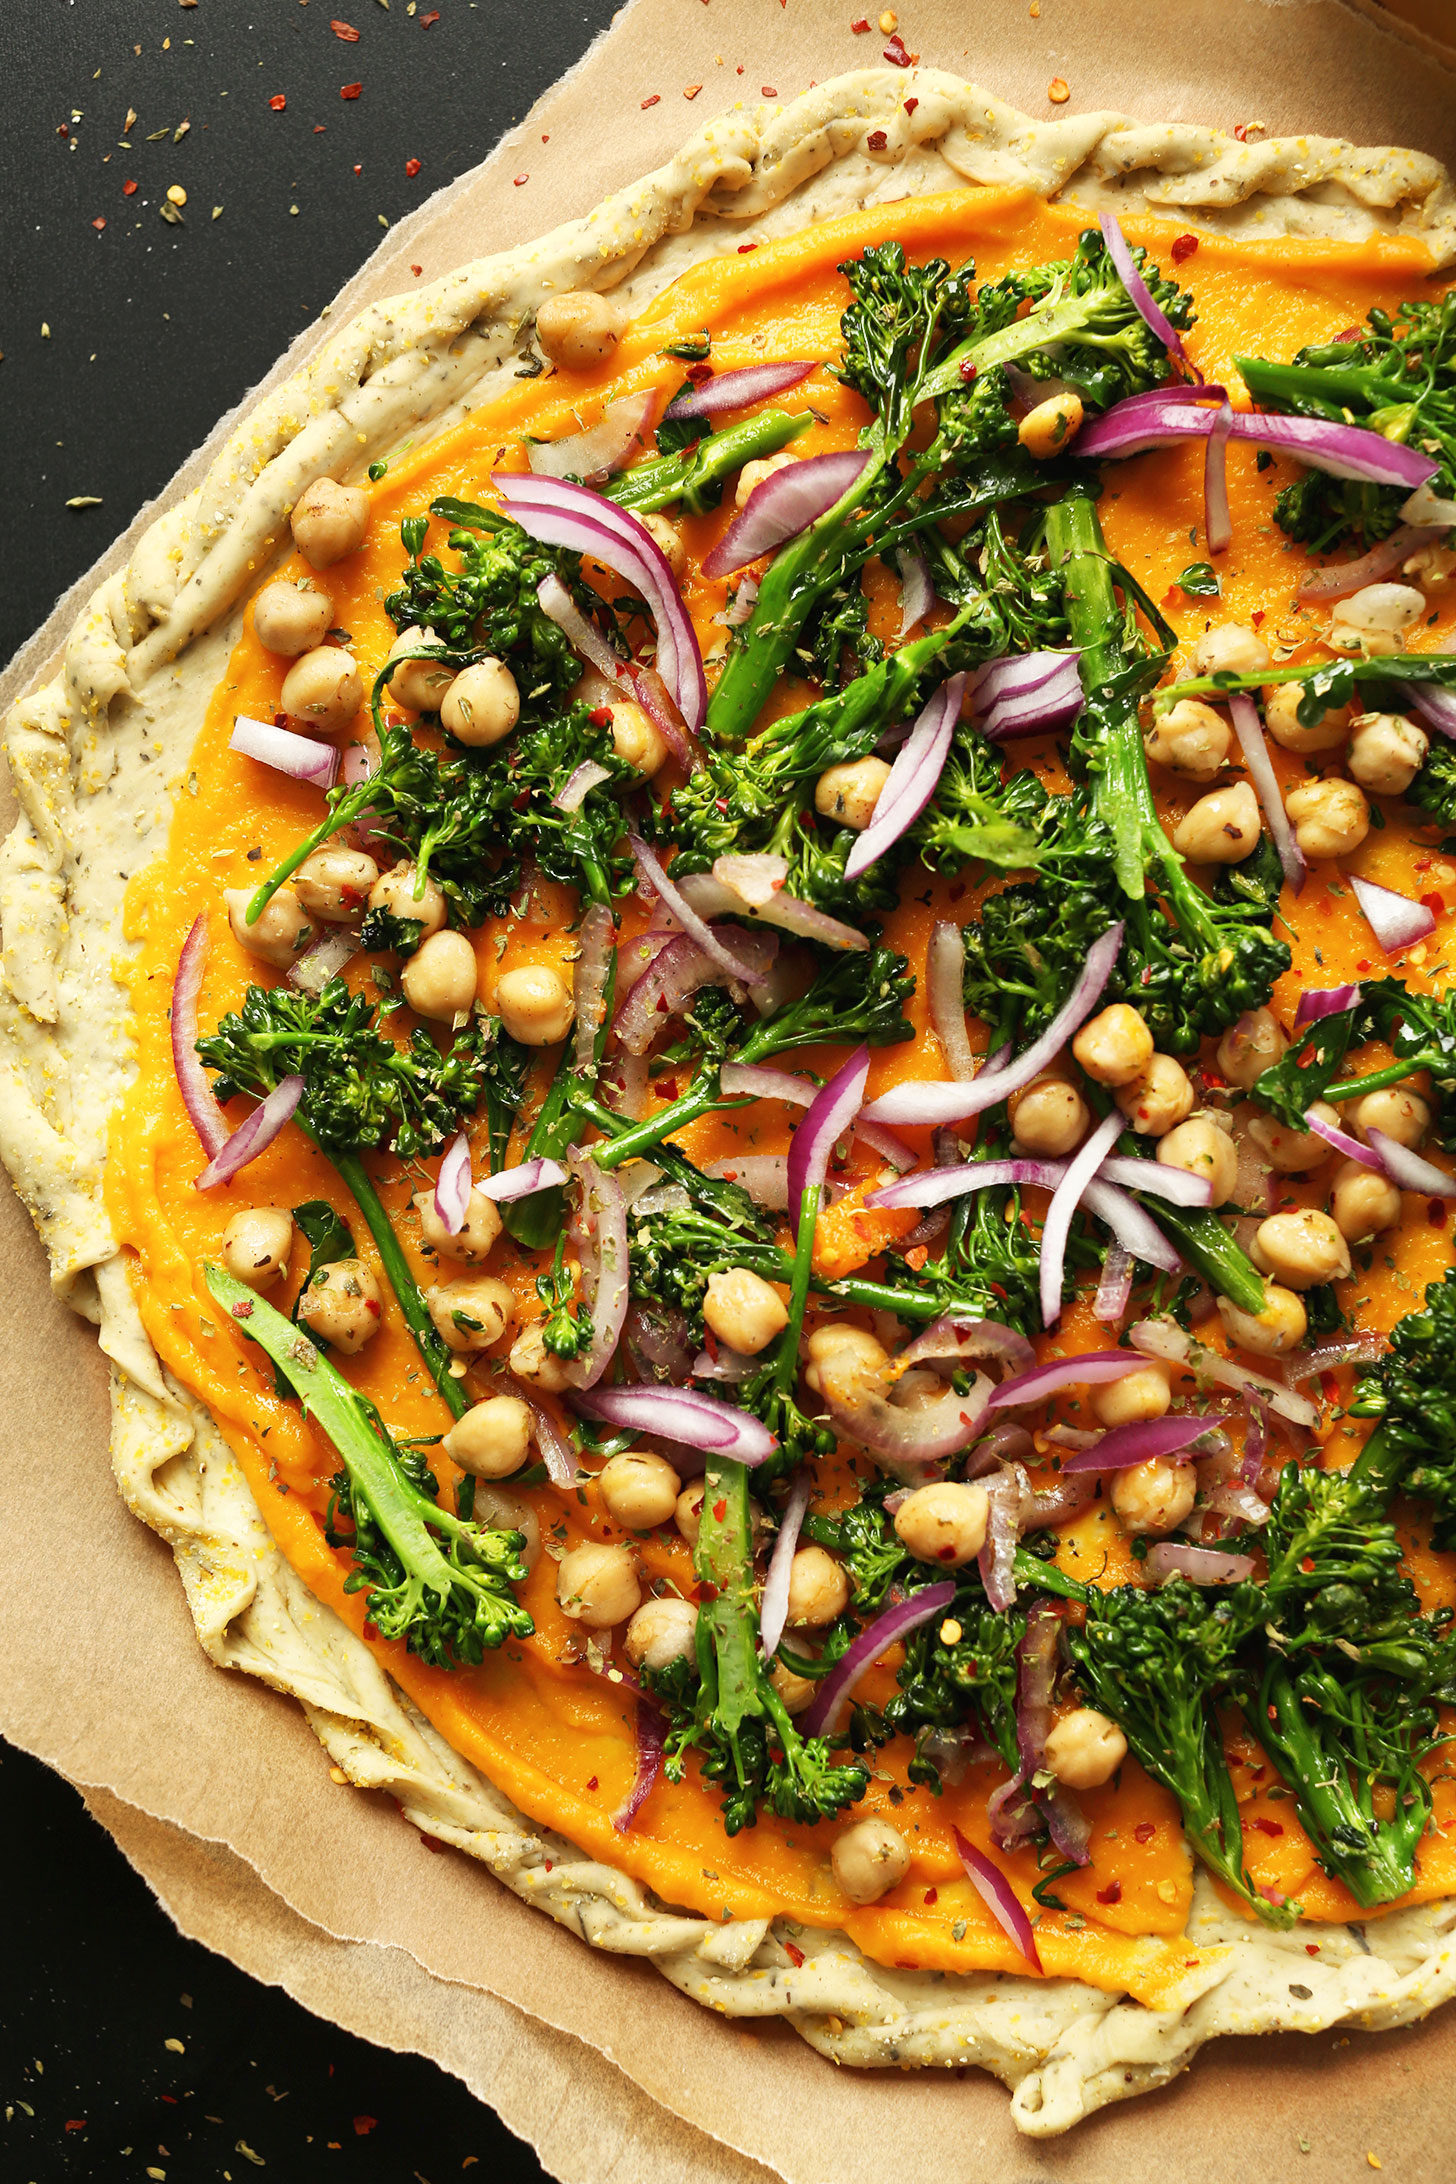 AMAZING-10-Ingredient-Butternut-Squash-and-Vegetable-Pizza-vegan-recipe-pizza-fall-butternutsquash-healthy-dinner